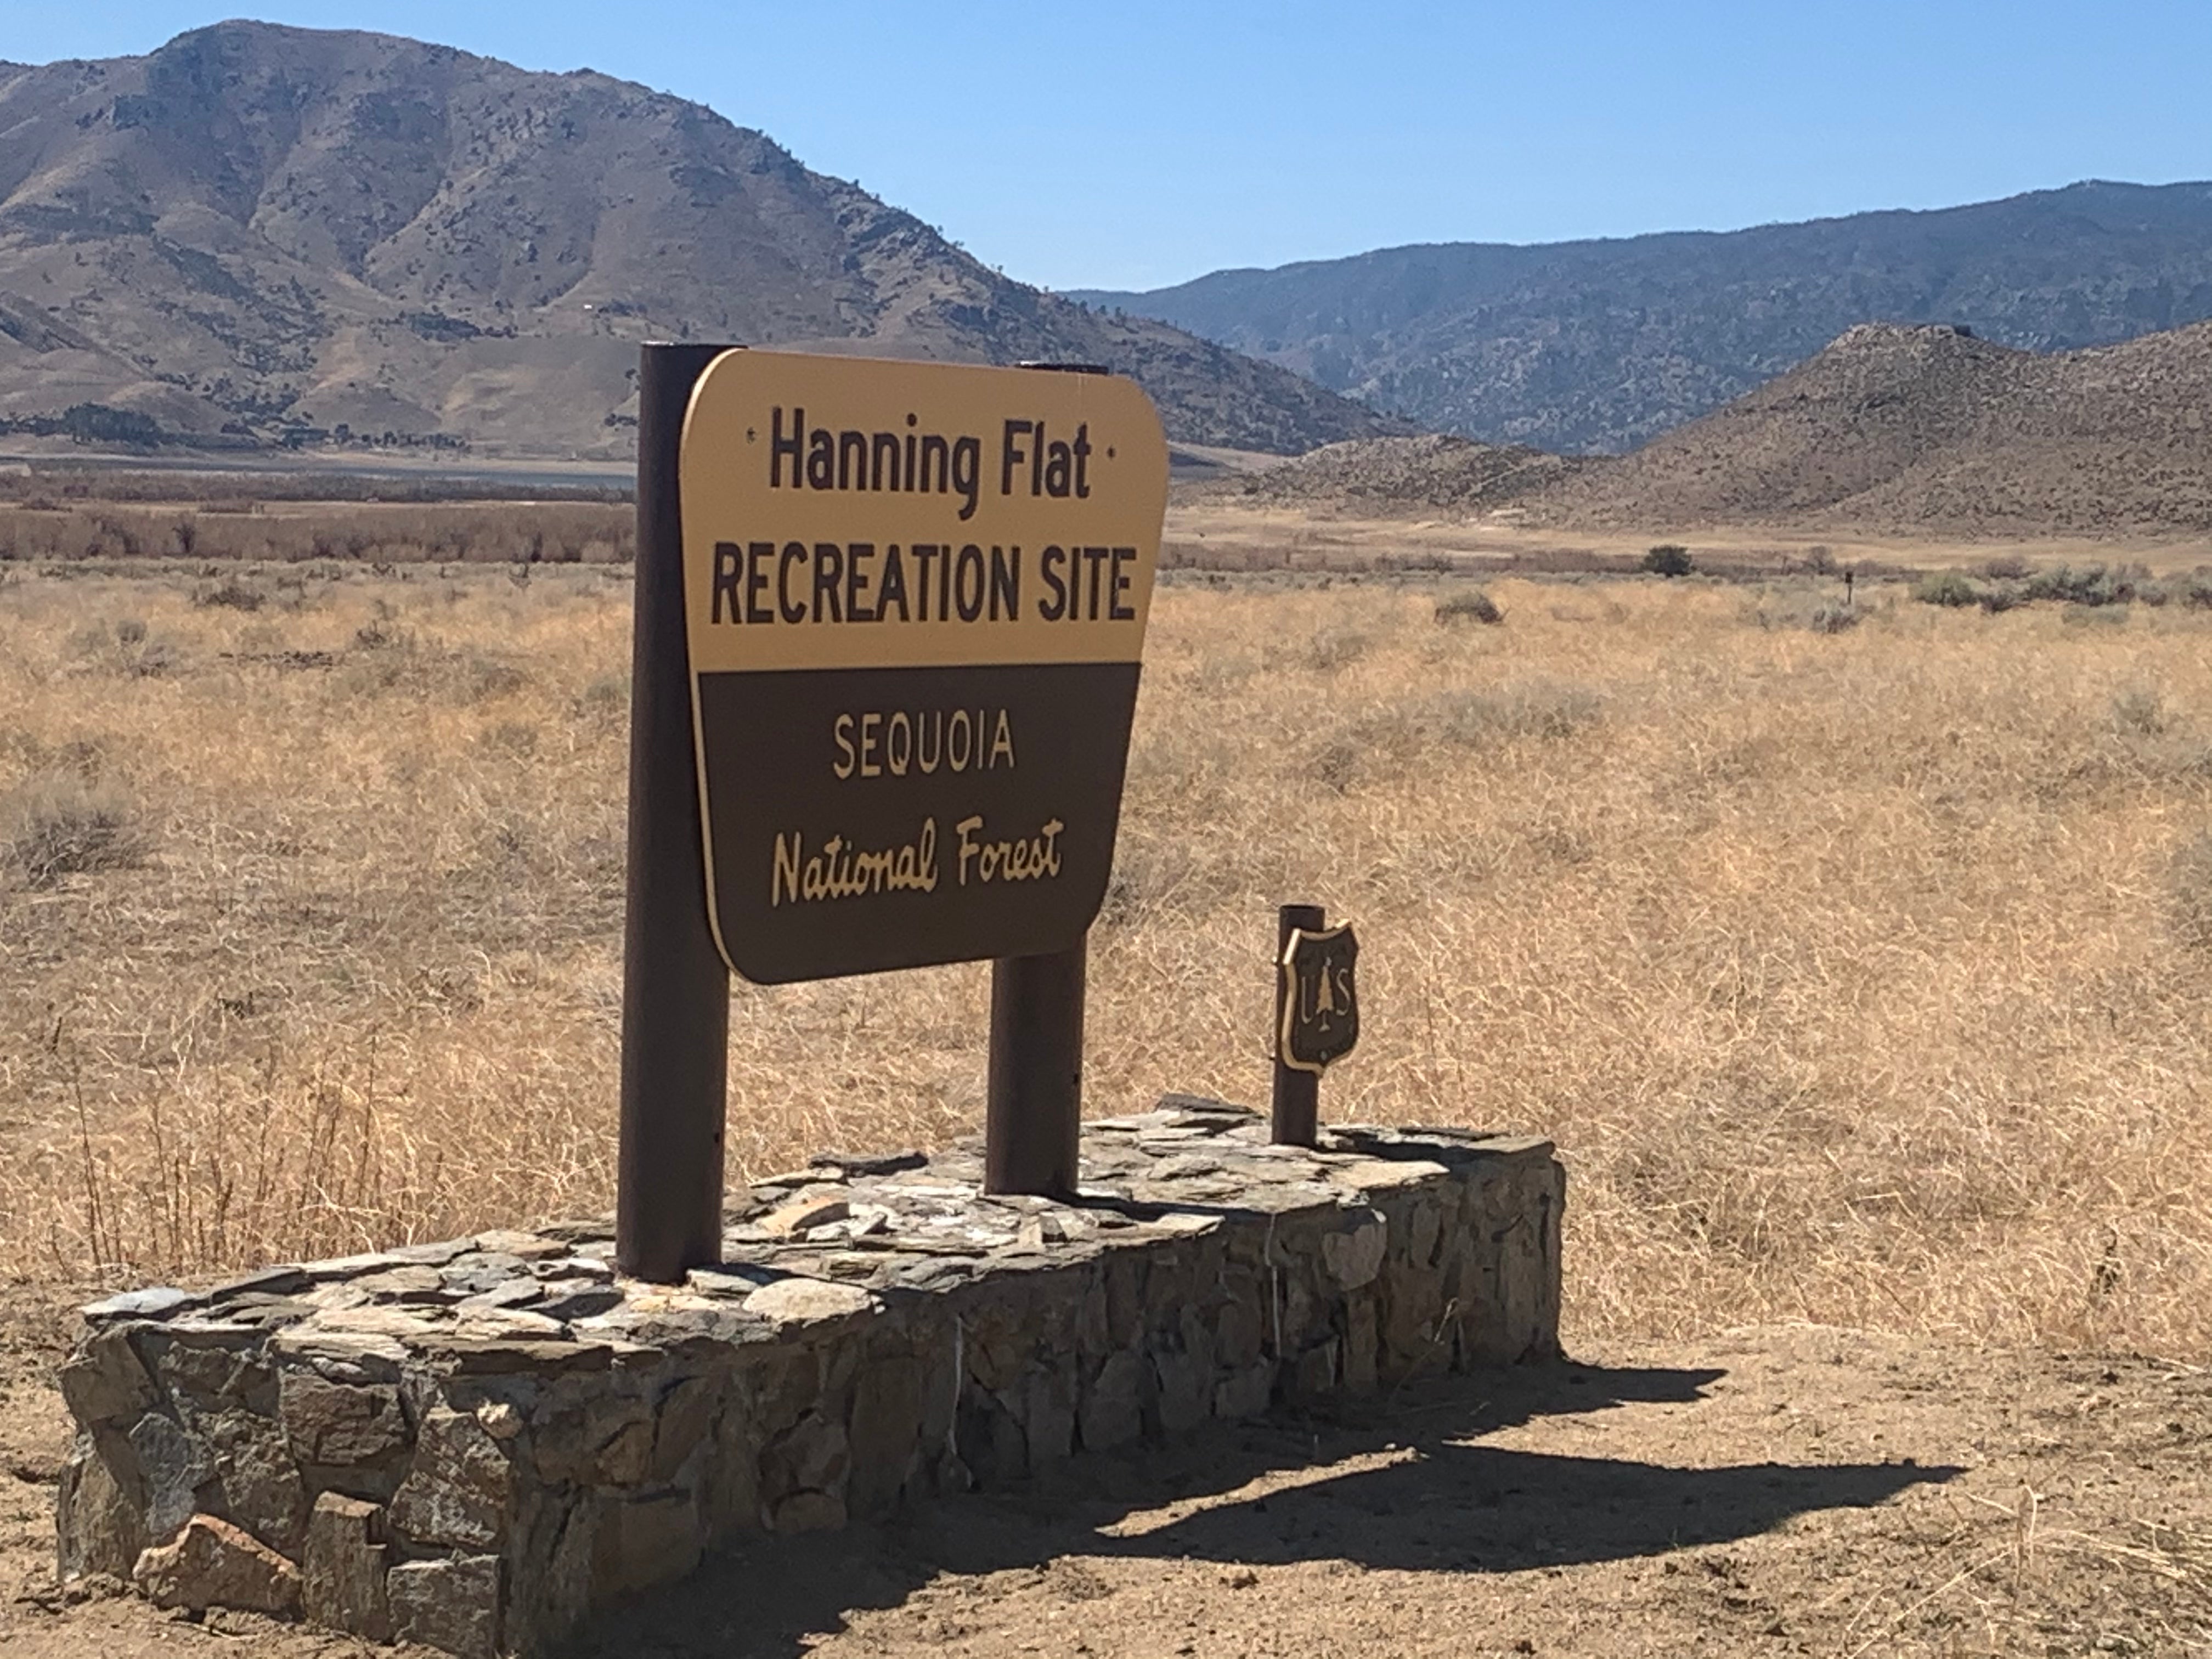 Camper submitted image from Hanning Flat Dispersed Area - 3